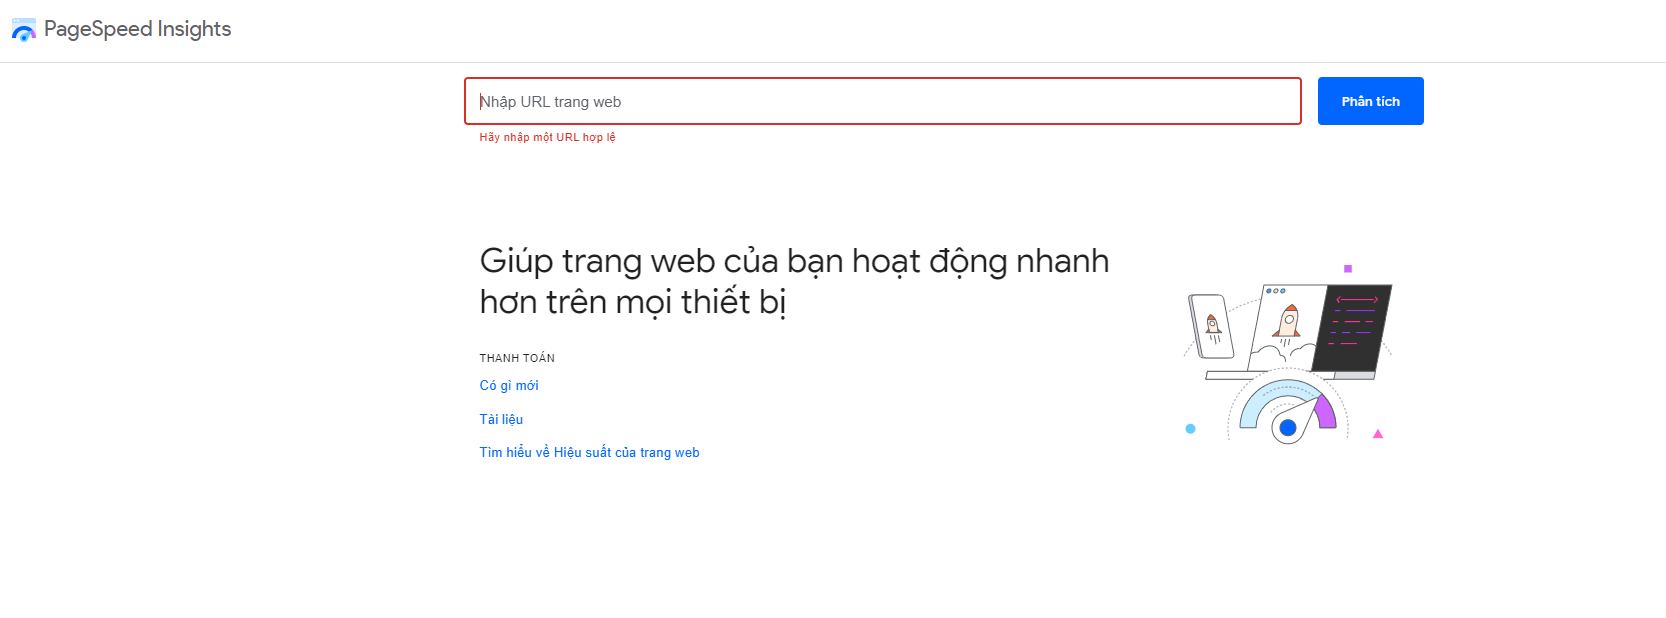 Giao diện trang Google PageSped Insights